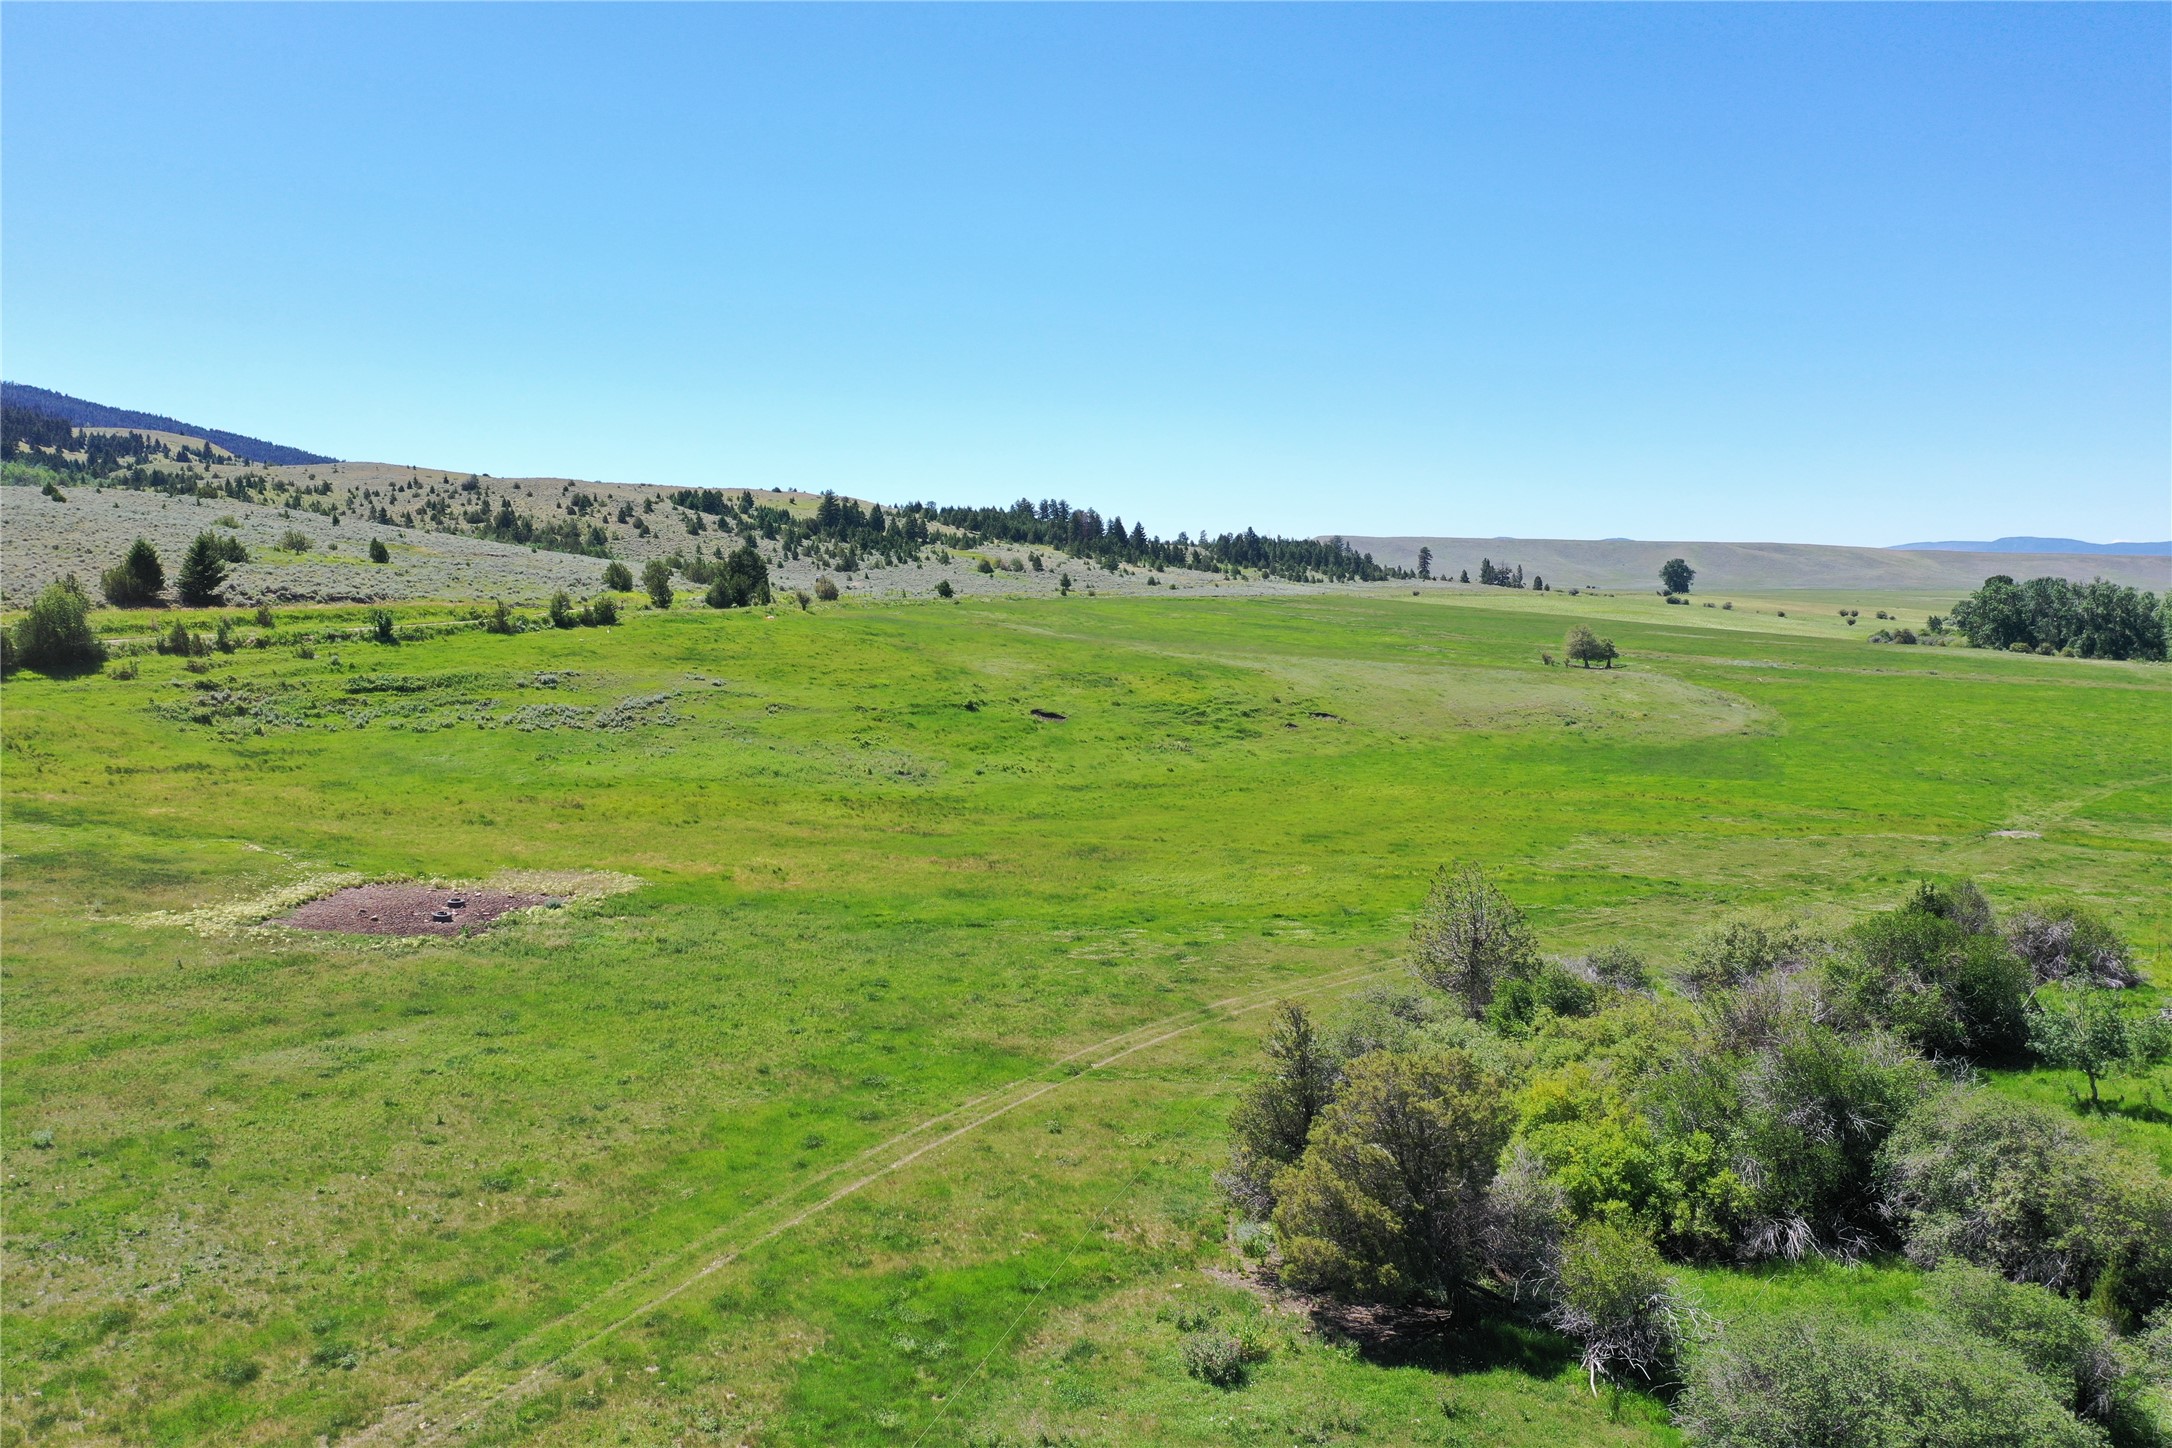 Beautiful 157.51 +/- Acre parcel with a irrigation canal running the length of the property.  Irrigation rights, irrigated meadows ... Water and Beautiful views.  You don't want to pass up this tract of land!